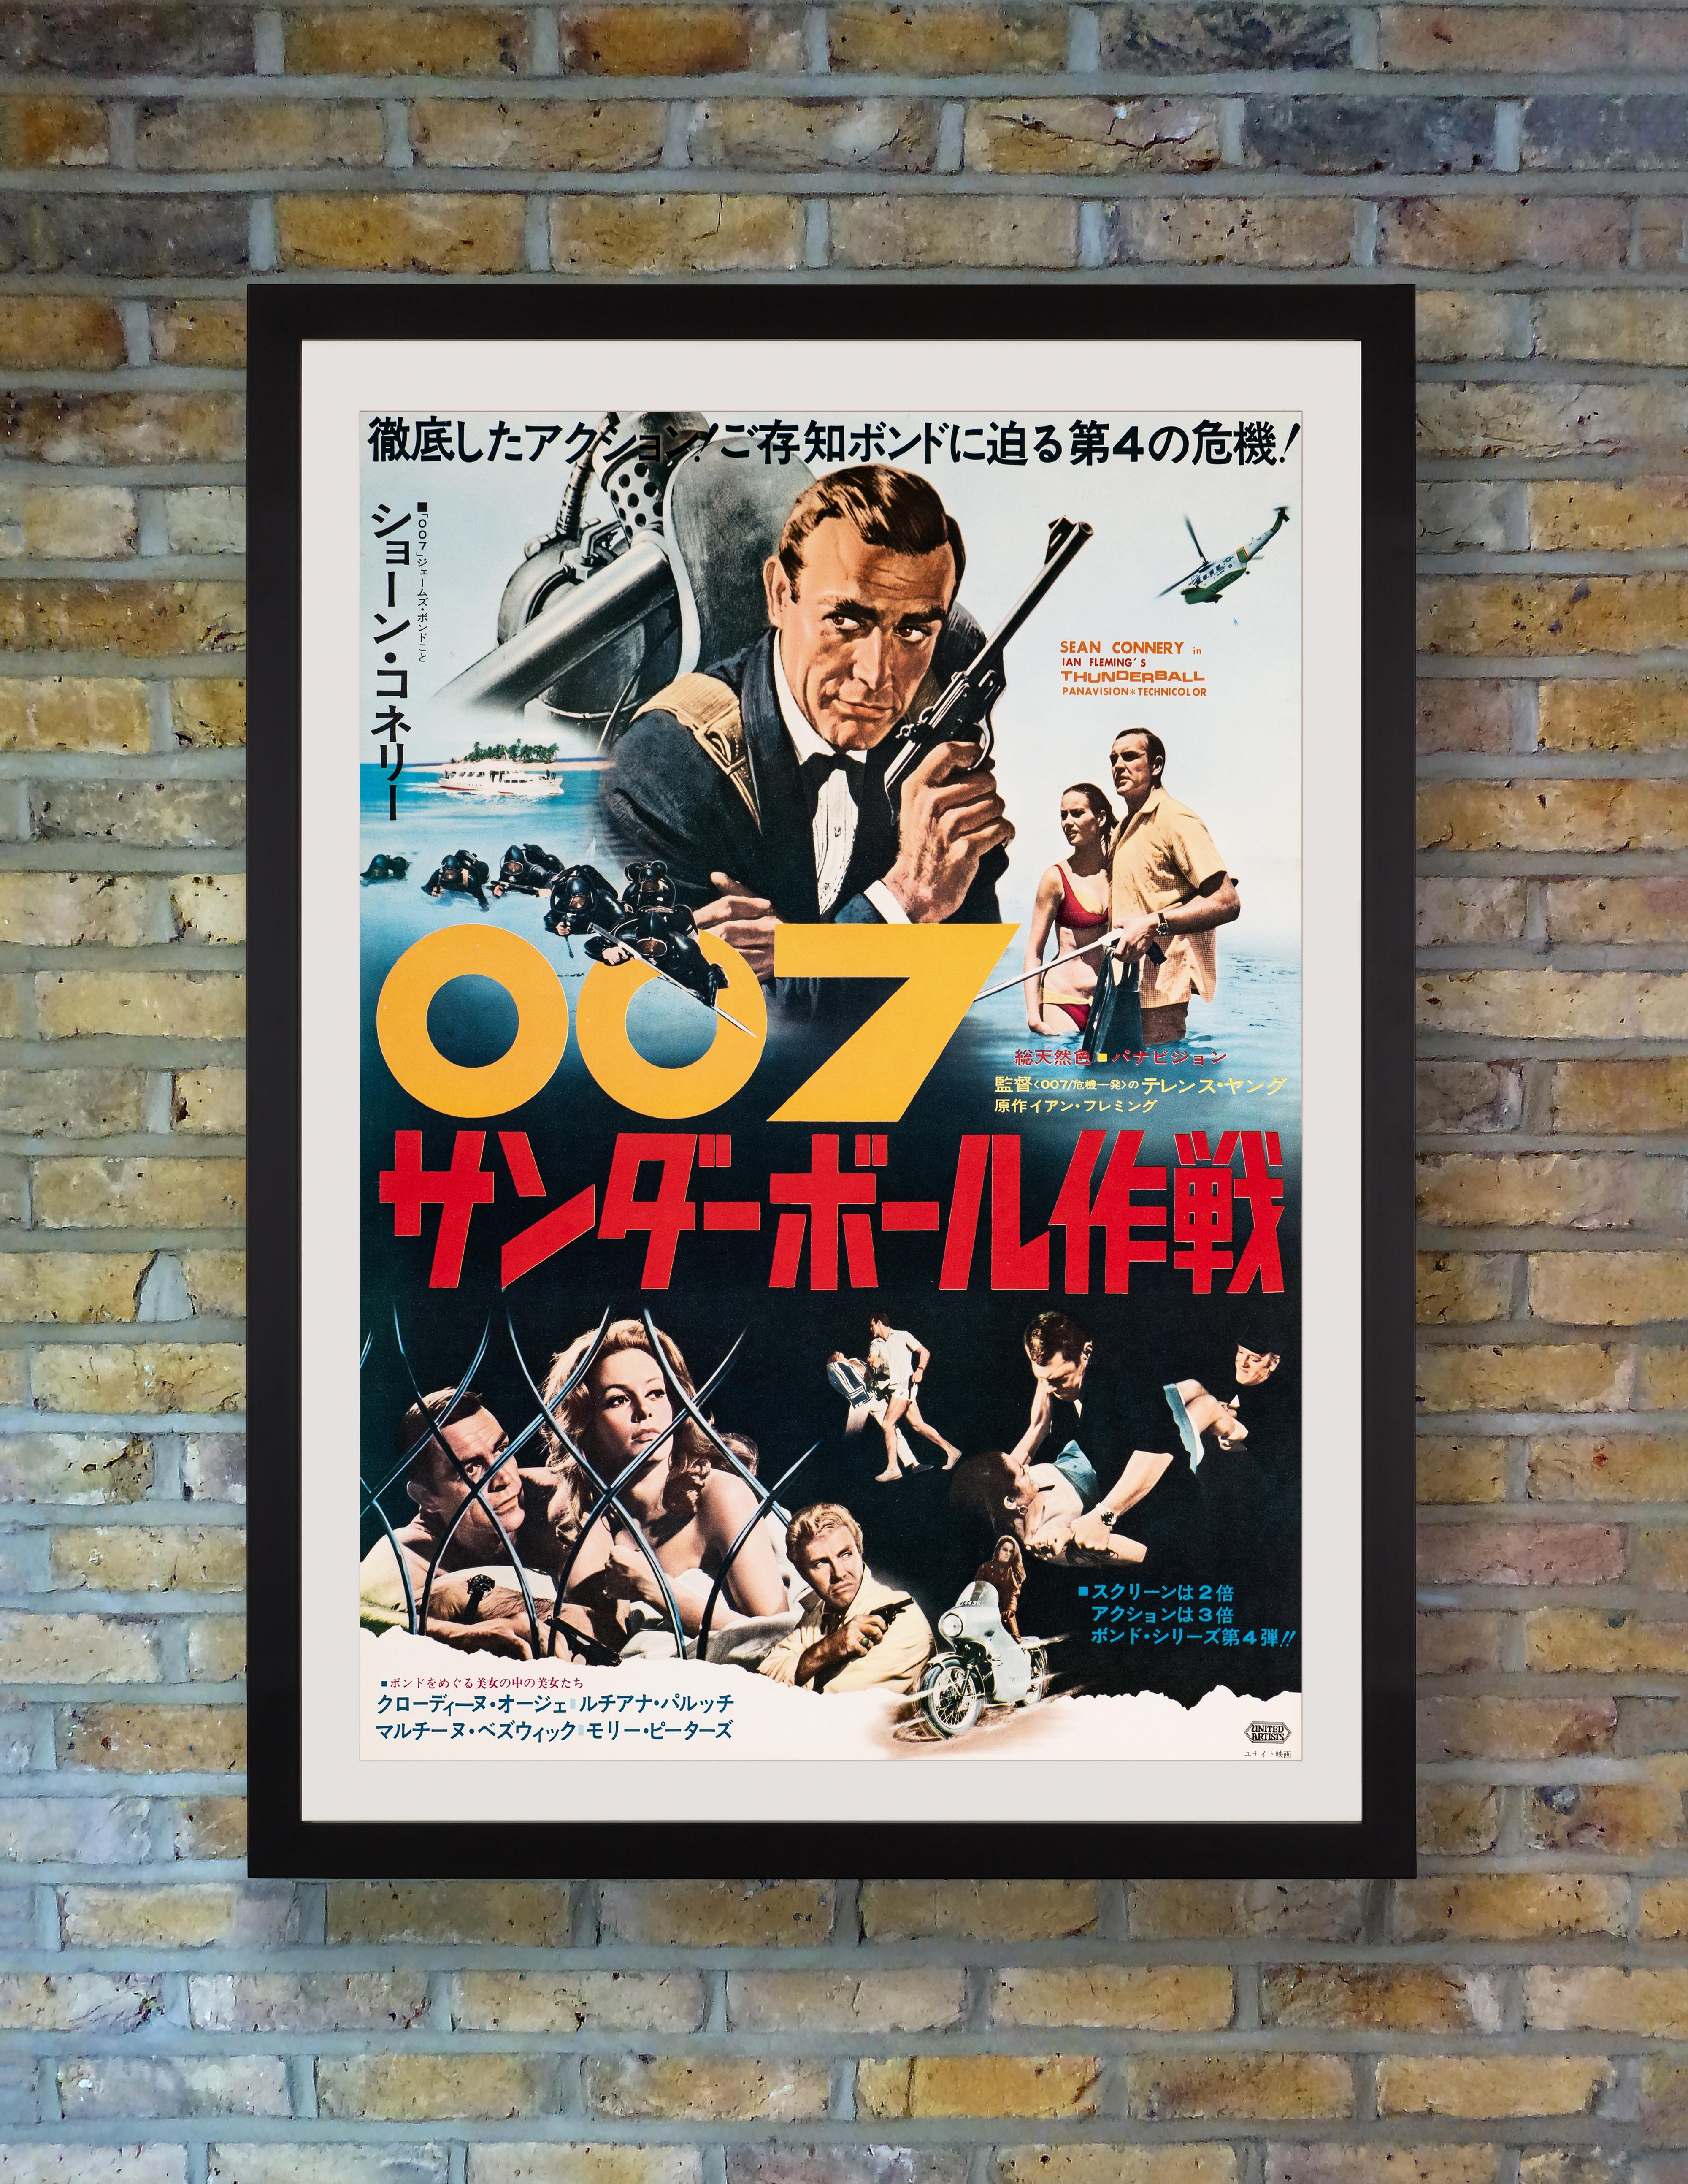 In Sean Connery's fourth outing as suave secret agent James Bond, 'Thunderball' saw the British spy dispatched to the Bahamas to recover two nuclear warheads stolen by Spectre, culminating in an underwater battle with villain Emilio Largo's